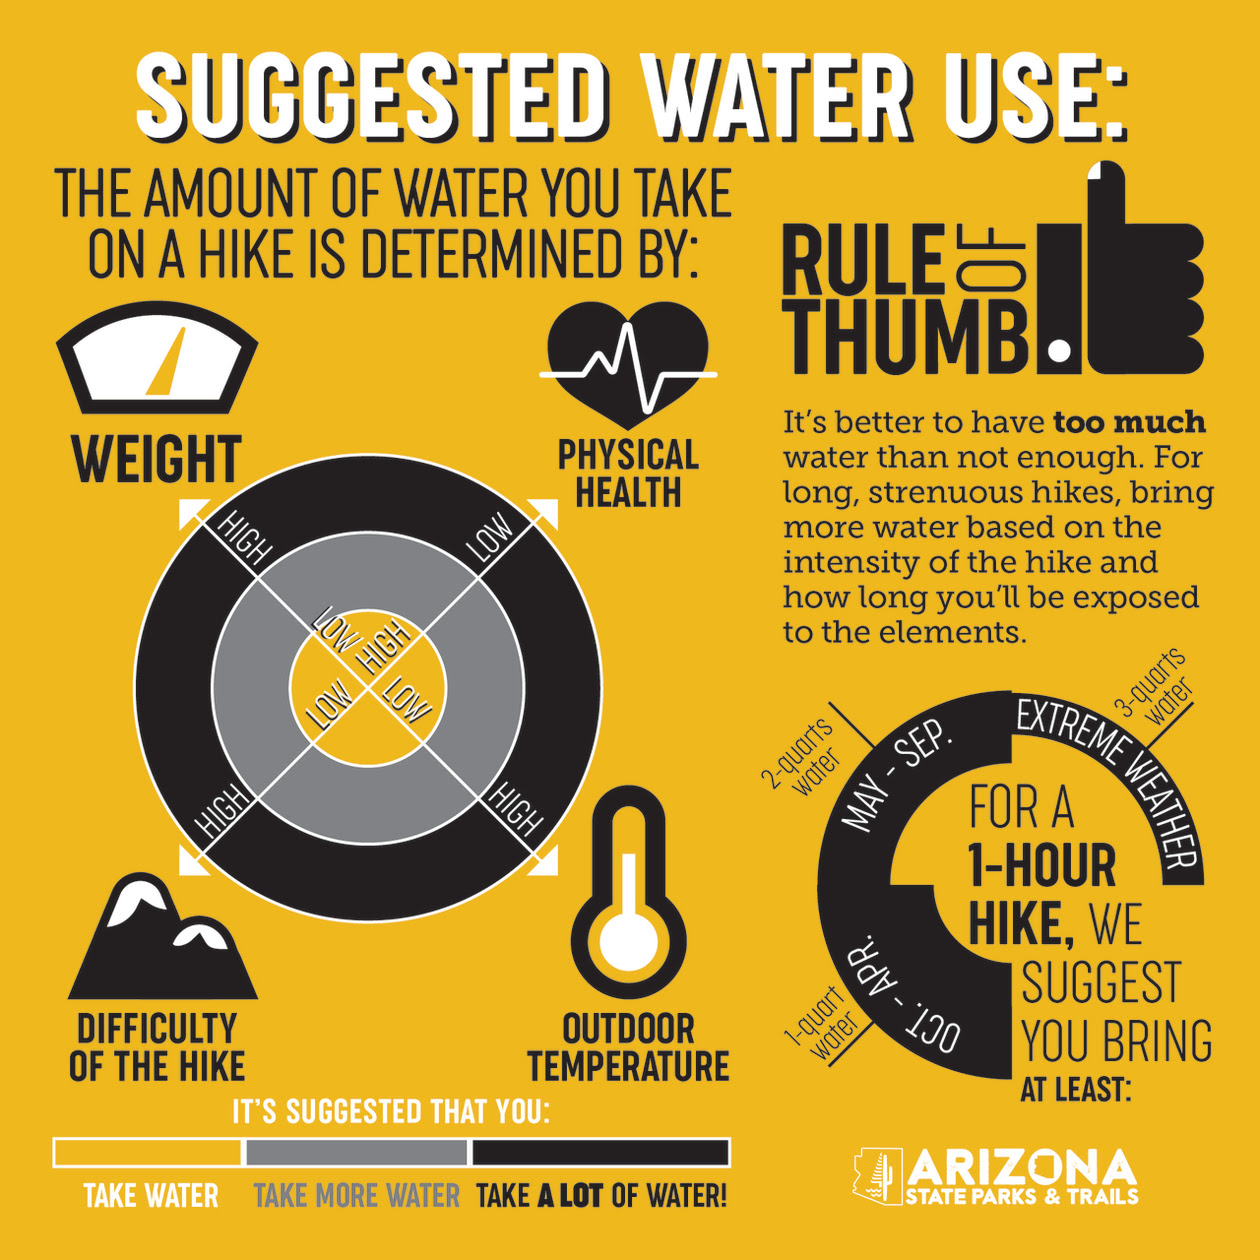 Suggested water use for hiking infographic.